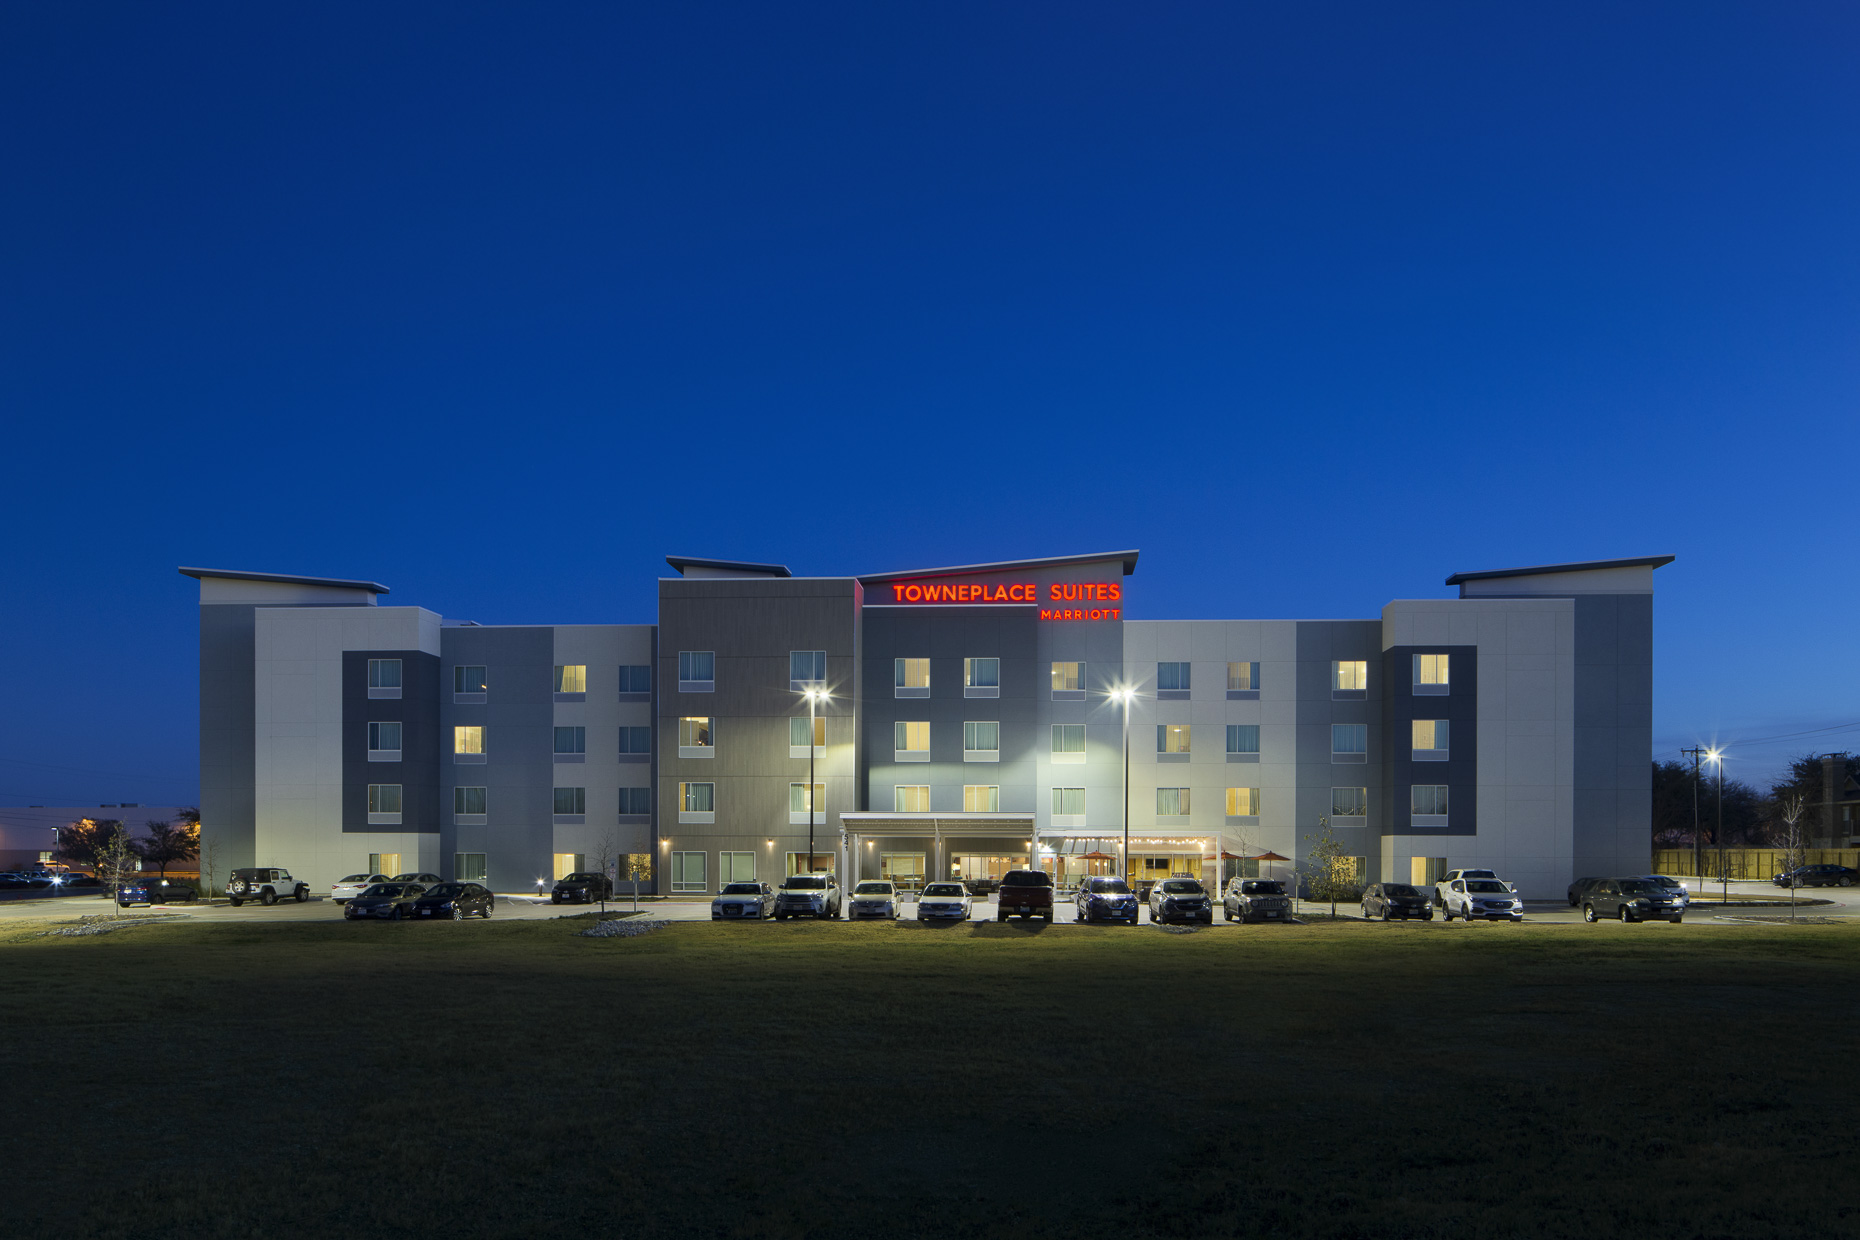 Towneplace Suites Austin Round Rock TPSAUSTN by Marriott photographed by Lauren K Davis based in Columbus, Ohio